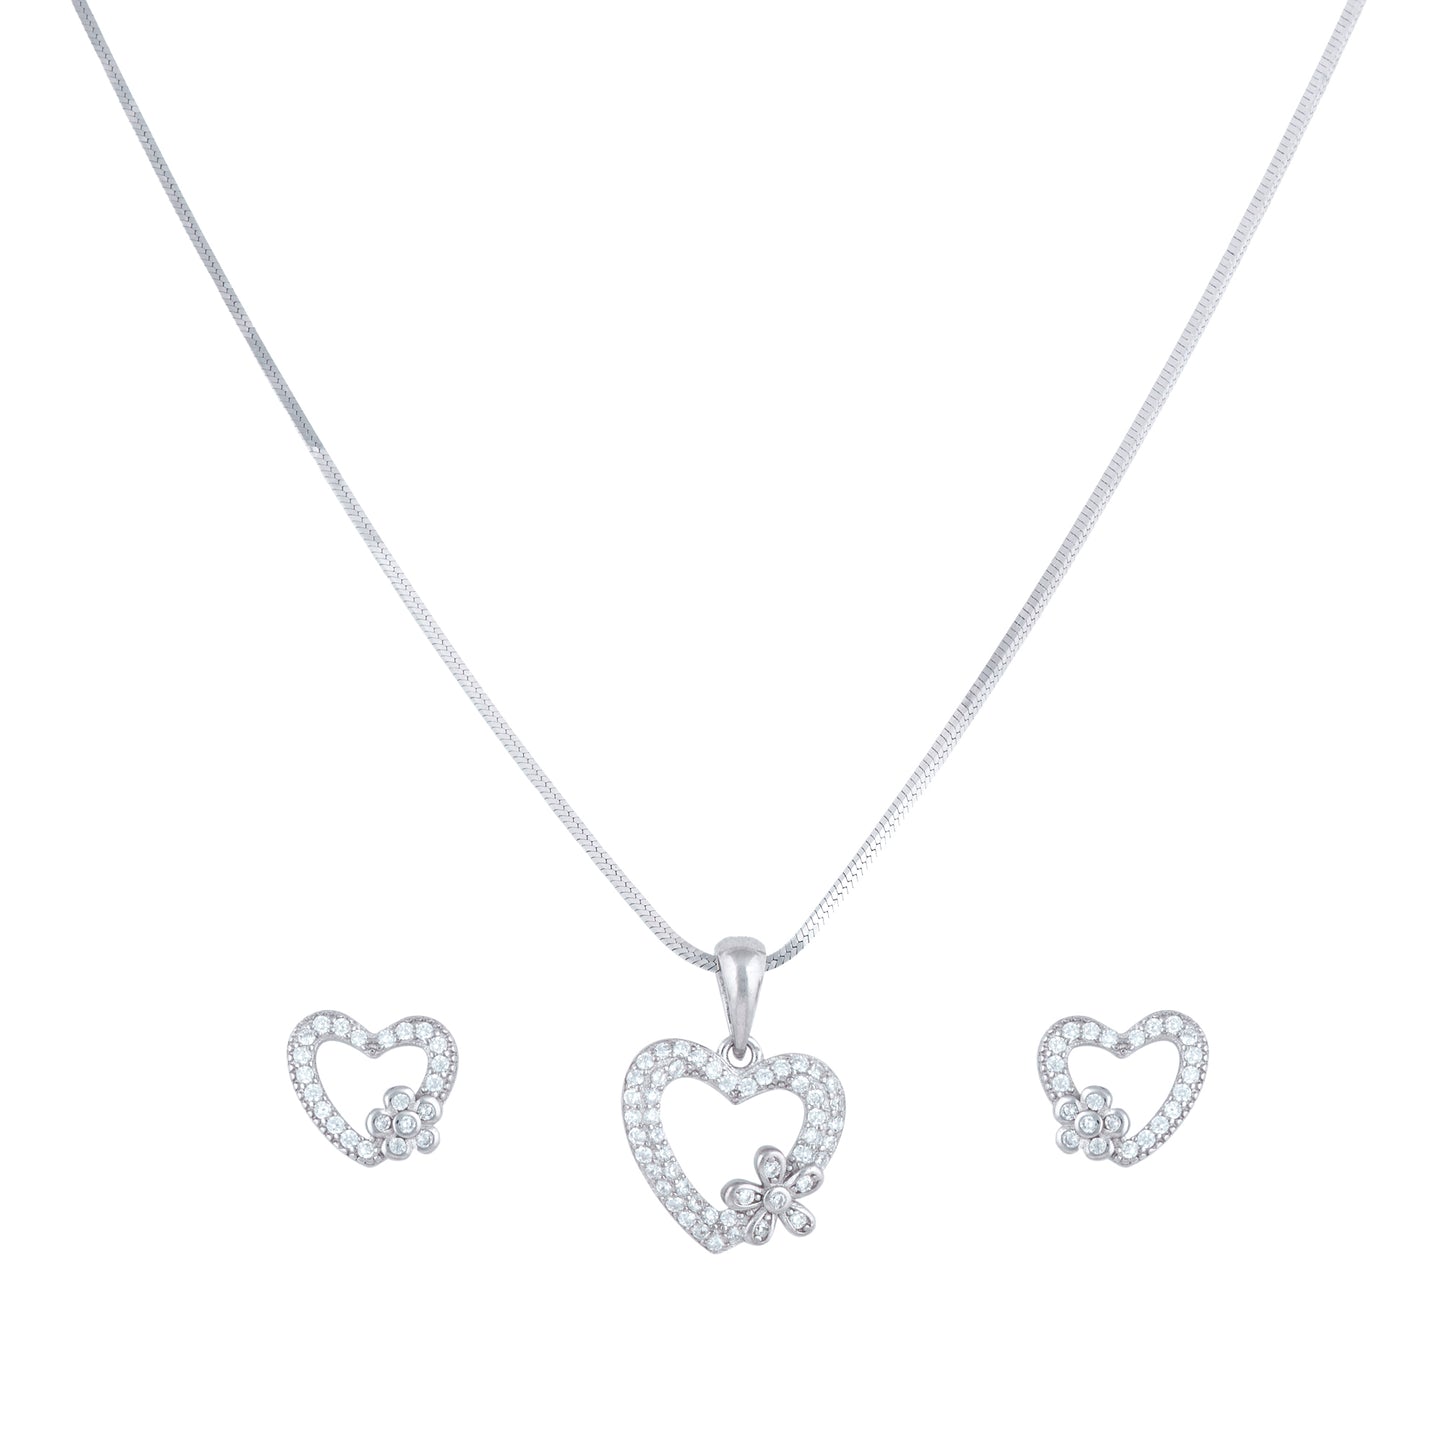 Silver Blooming Heart Necklace Set